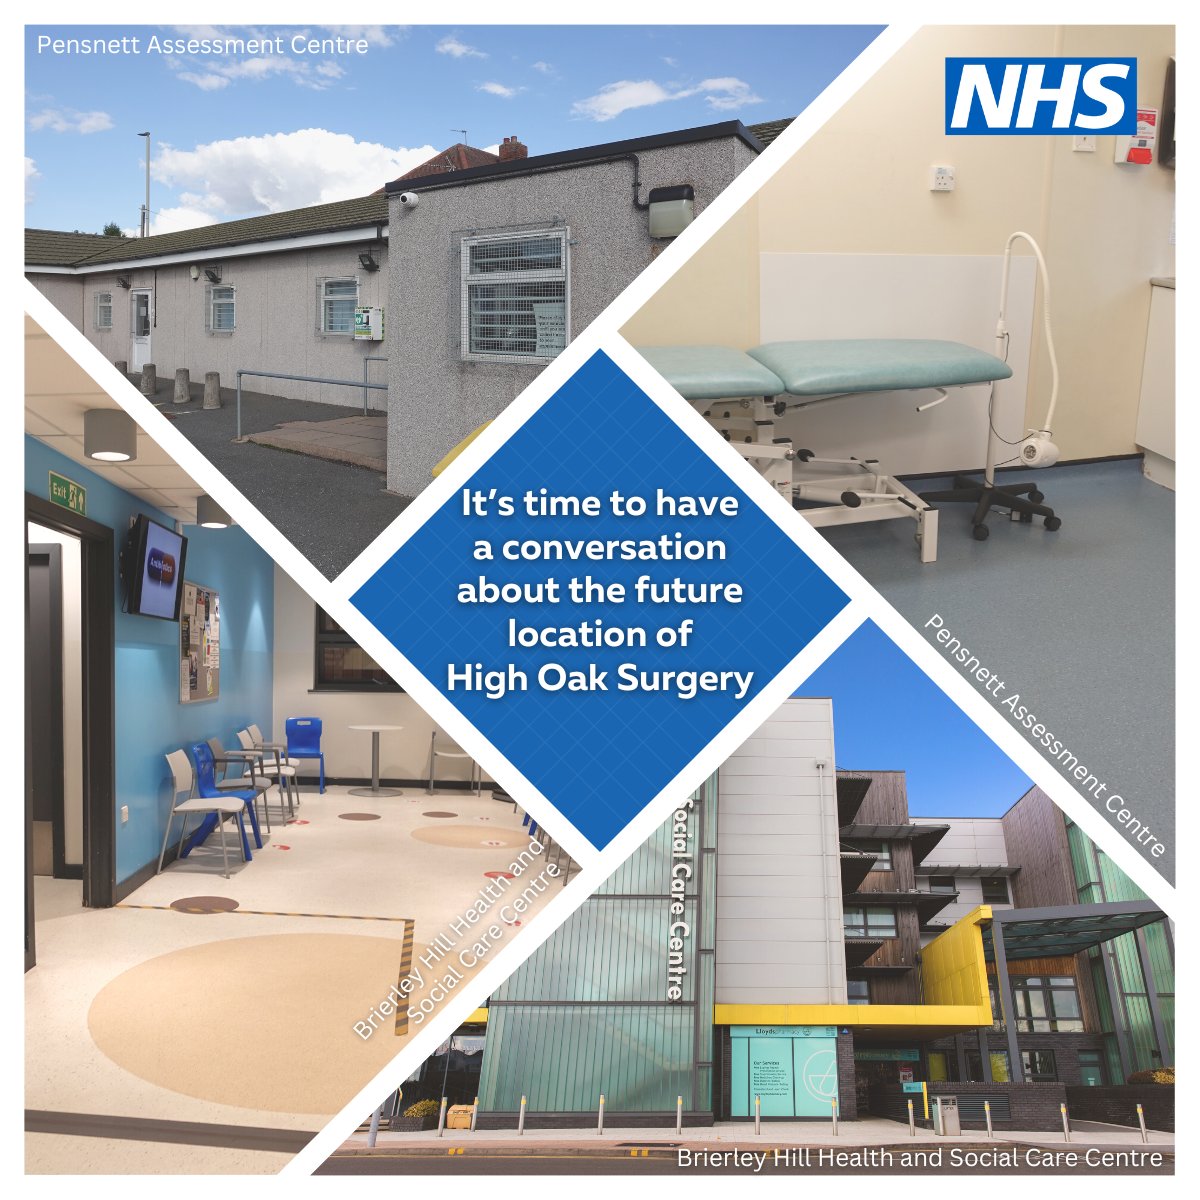 There is a drop-in session taking place today for those who would like one-to-one assistance filling out the survey for the High Oak Surgery Public Conversation. See where it is being held here. ow.ly/l6aN50LhCwx @NHSMidlands @dudleymbc @NHSinBlkCountry